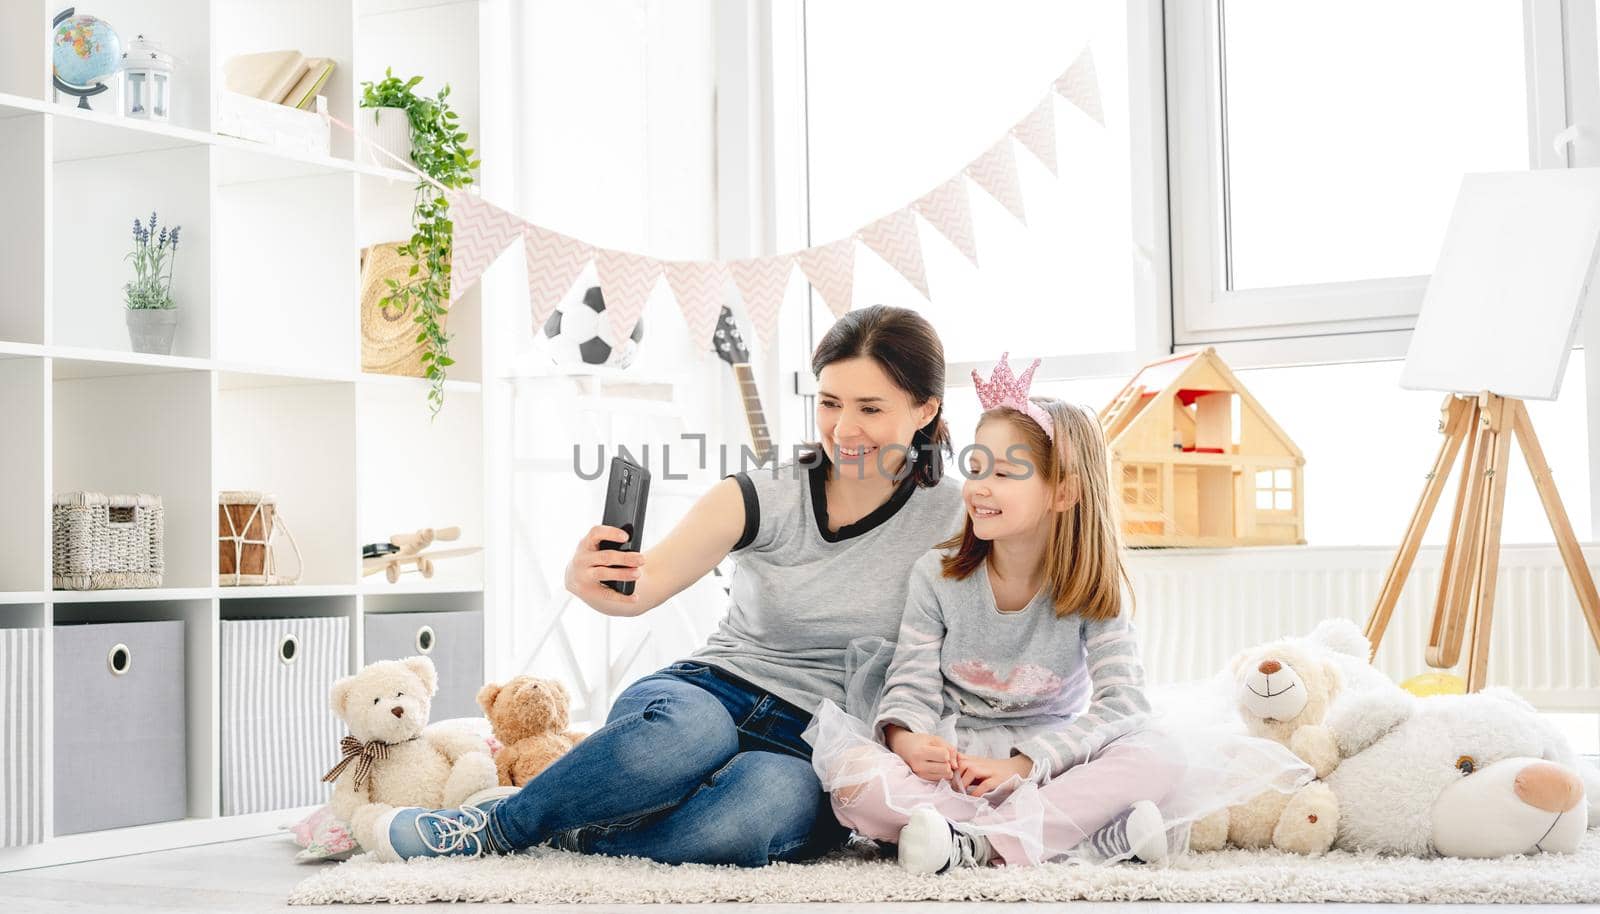 Smiling mother with daughter taking selfie in cute kids room